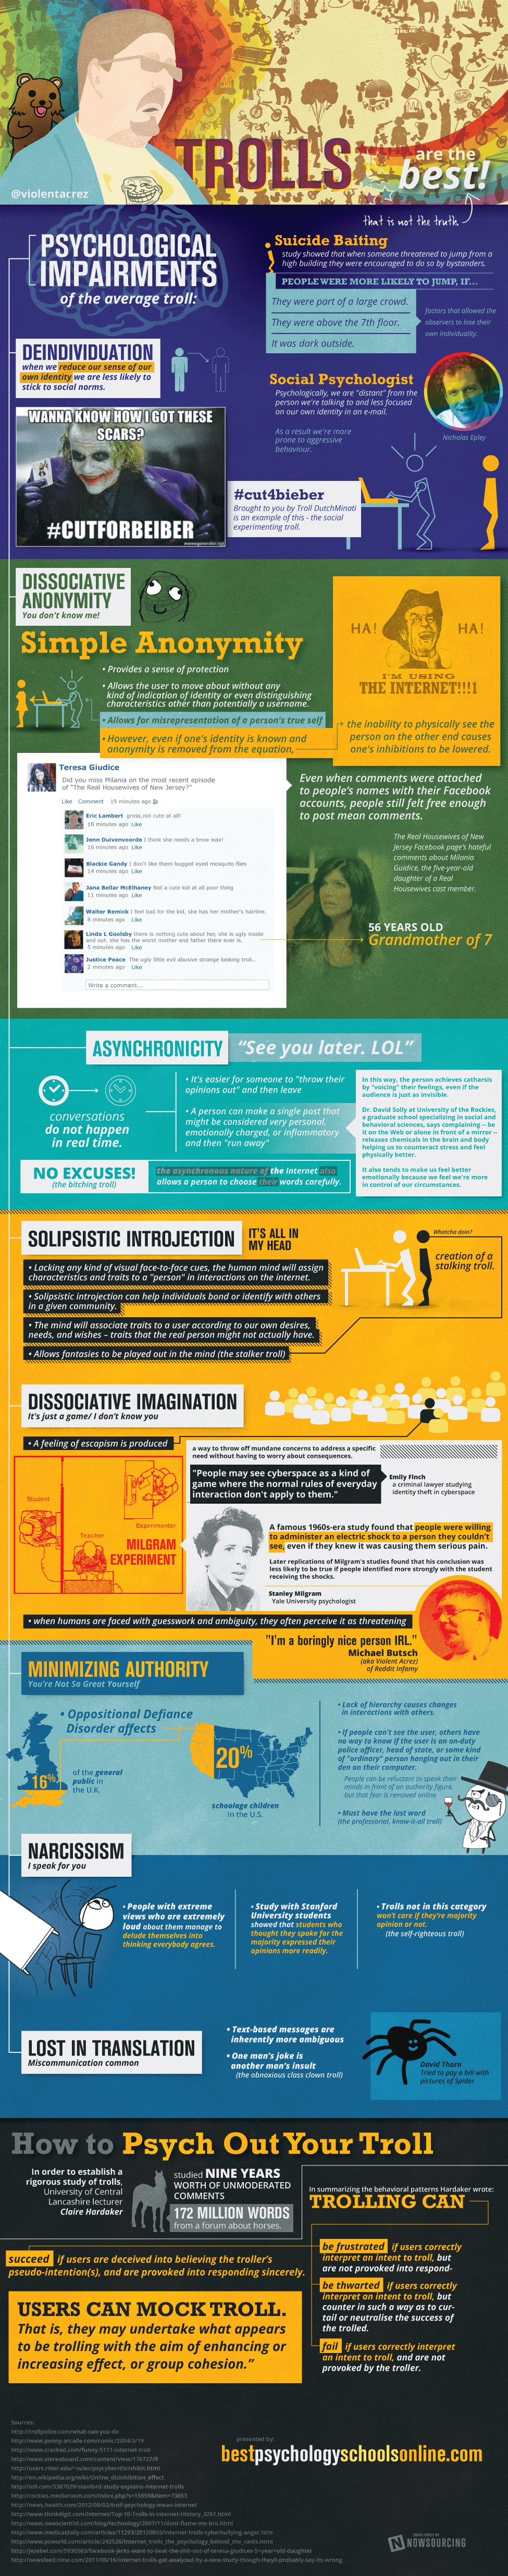 psychology-behind-internet-troll-infographic